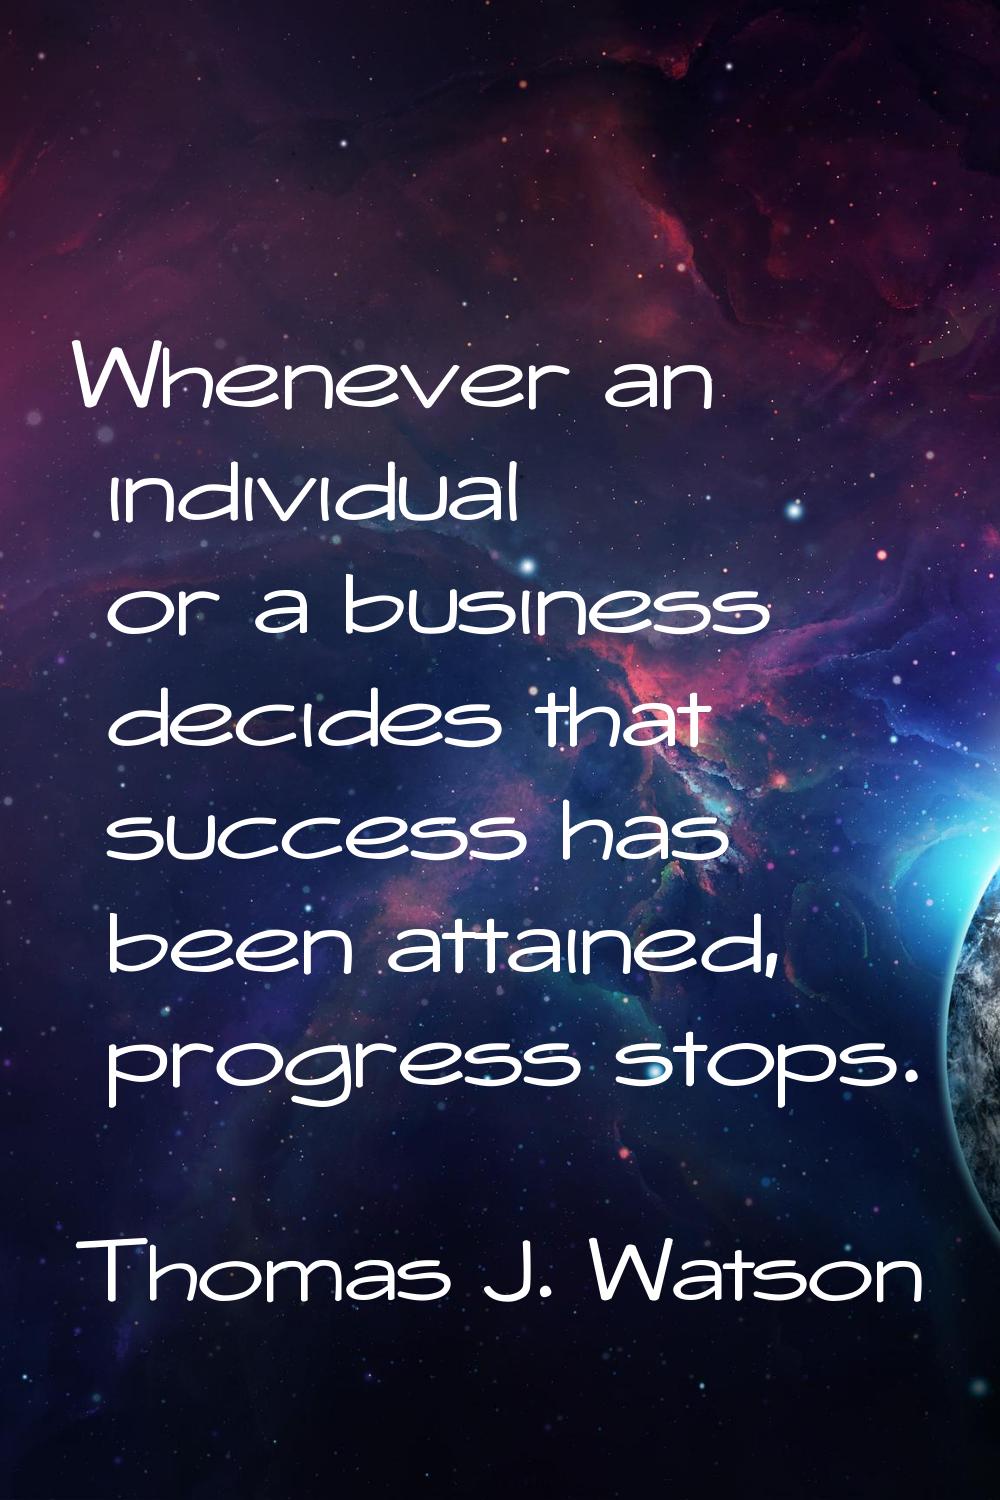 Whenever an individual or a business decides that success has been attained, progress stops.